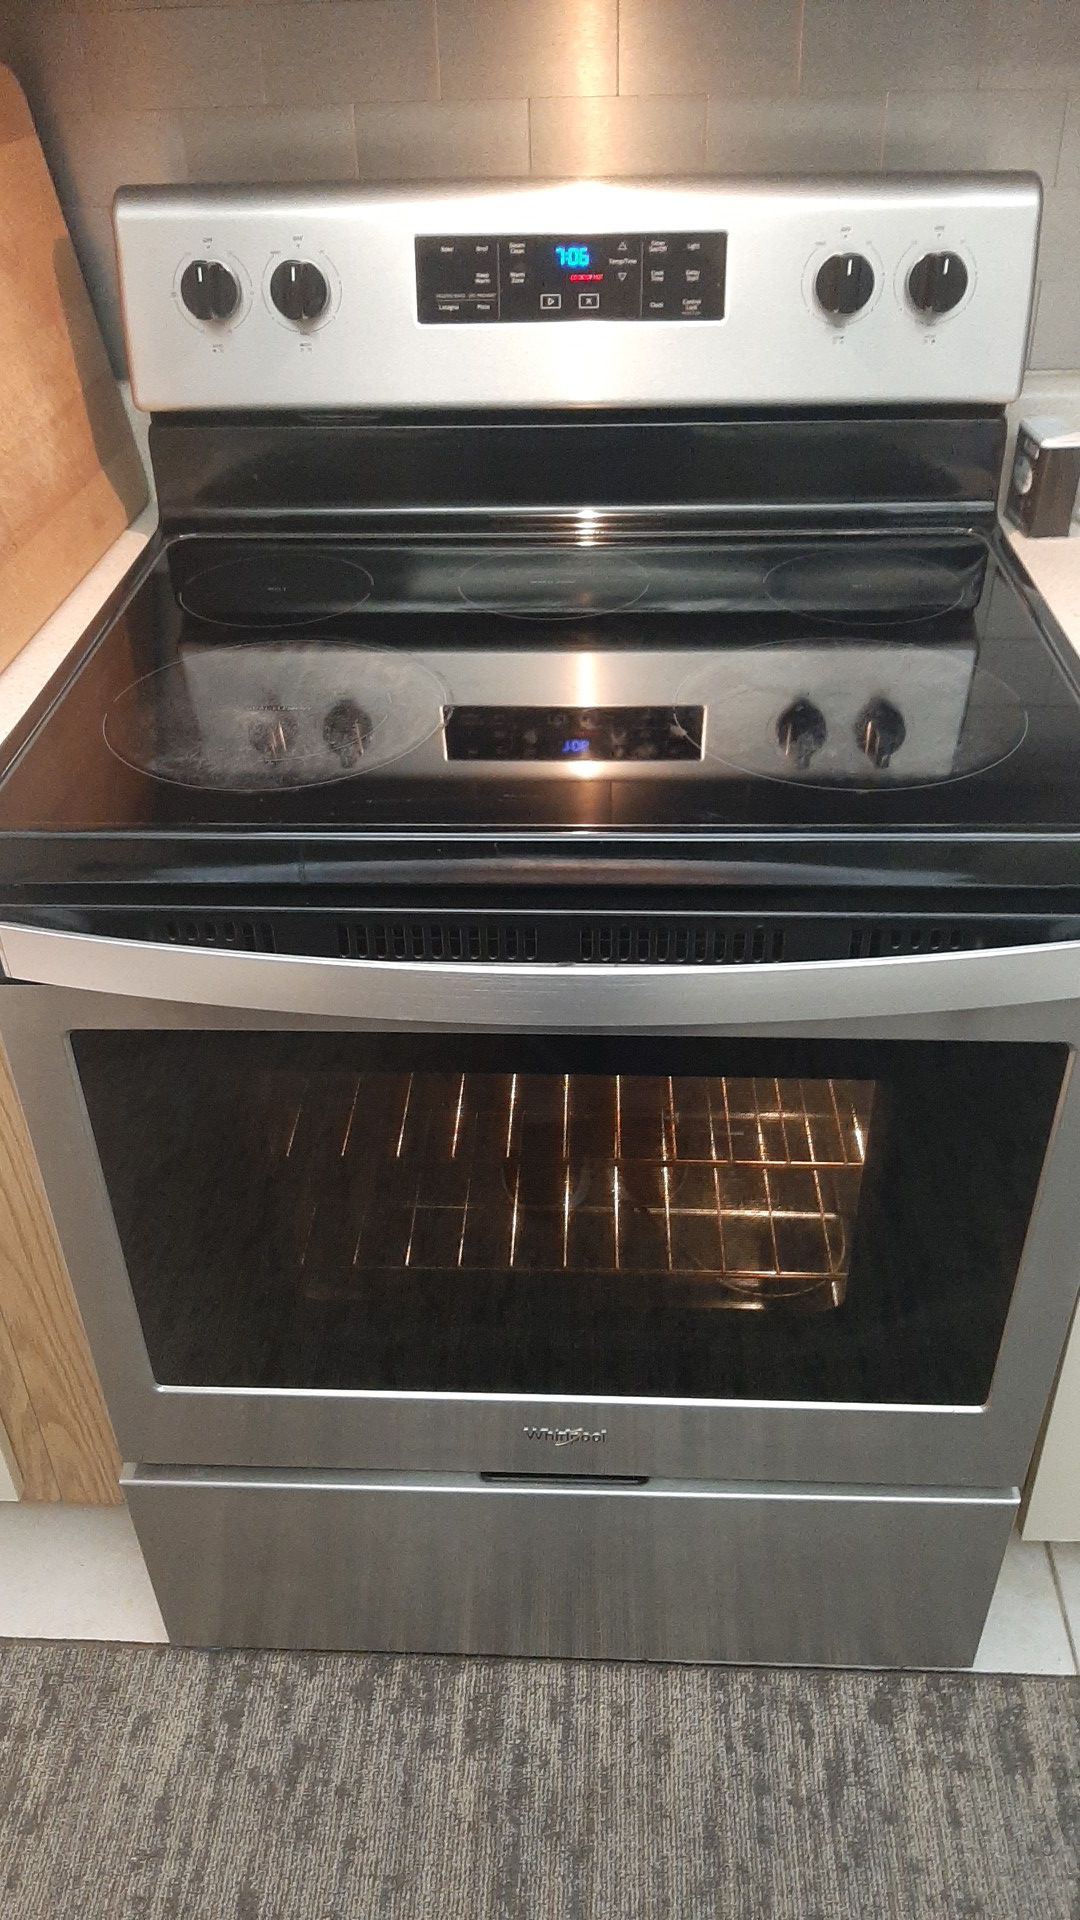 Whirlpool stove stainless steel 2 years old just bought a new stove with built in air fryer